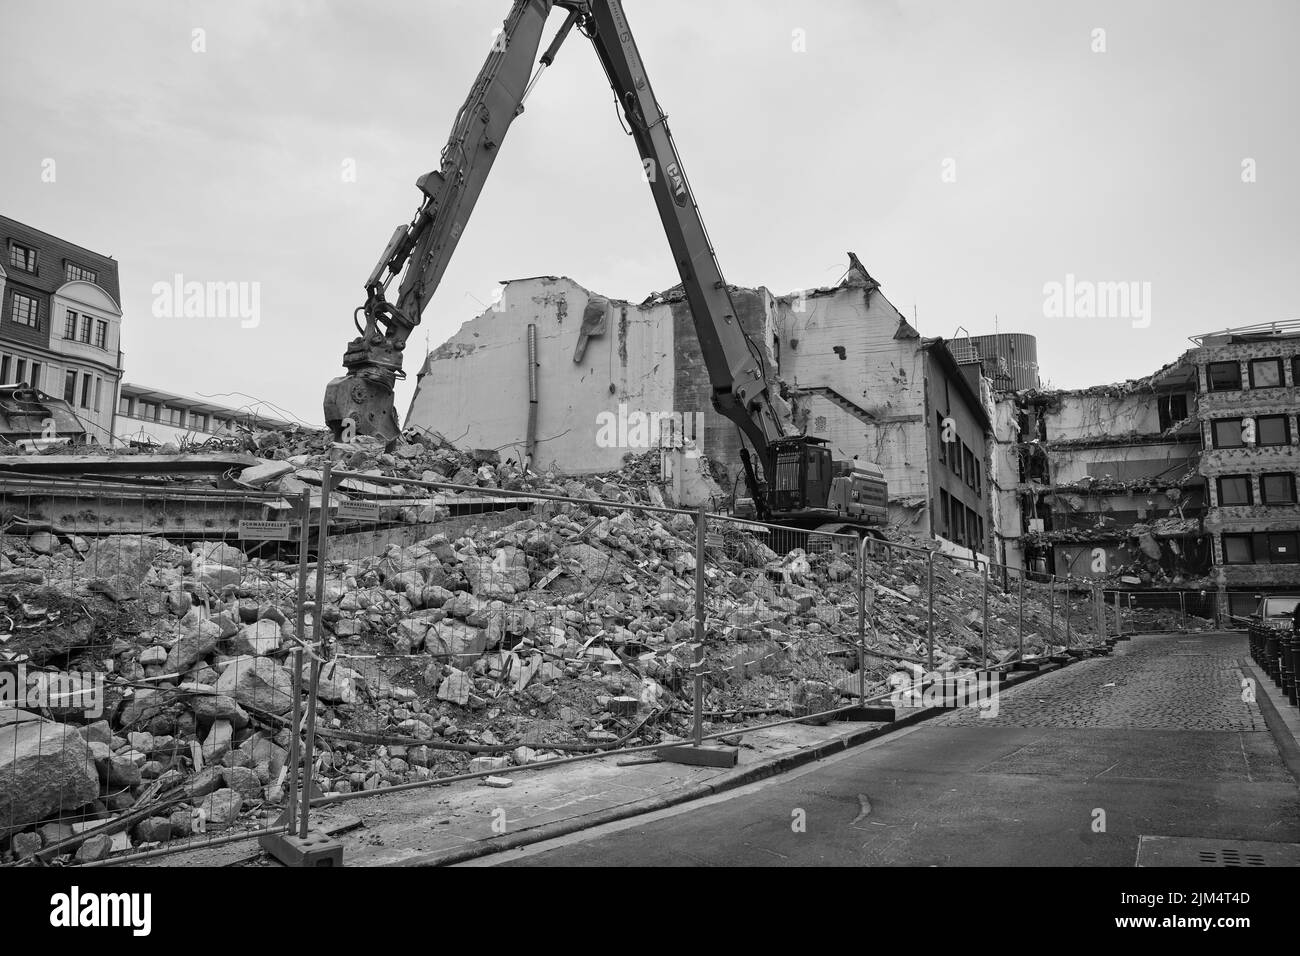 Demolition work in Cologne city center near the Cologne Cathedral, black and white phpto Stock Photo